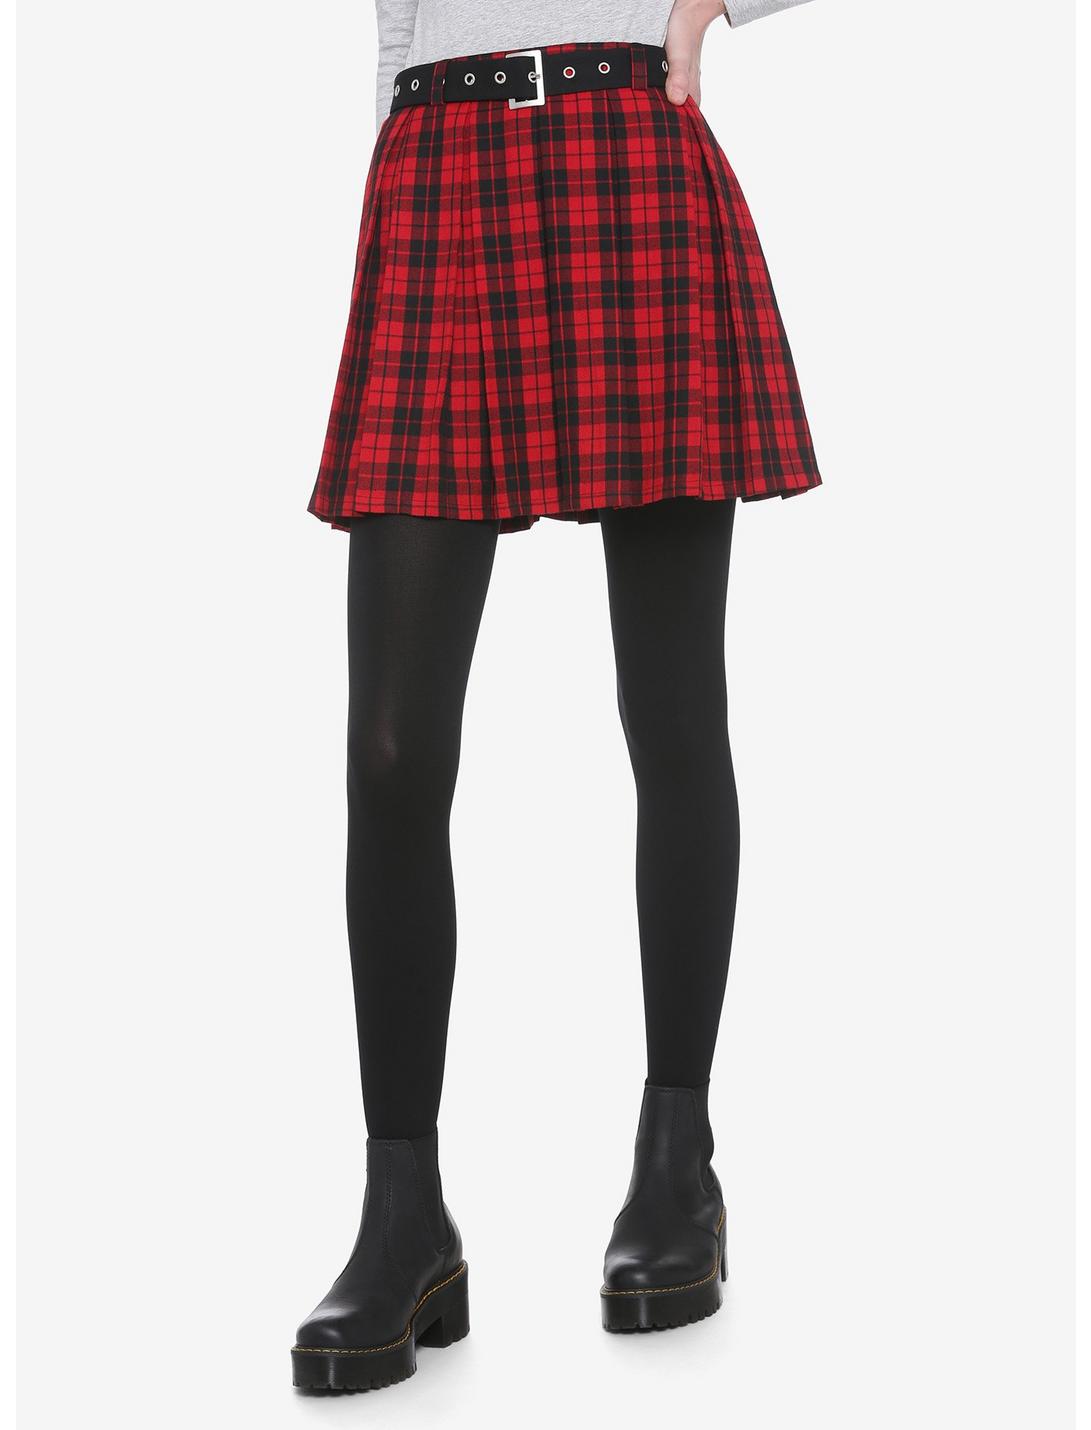 Red & Black Pleated Skirt With Grommet Belt, PLAID - RED, hi-res